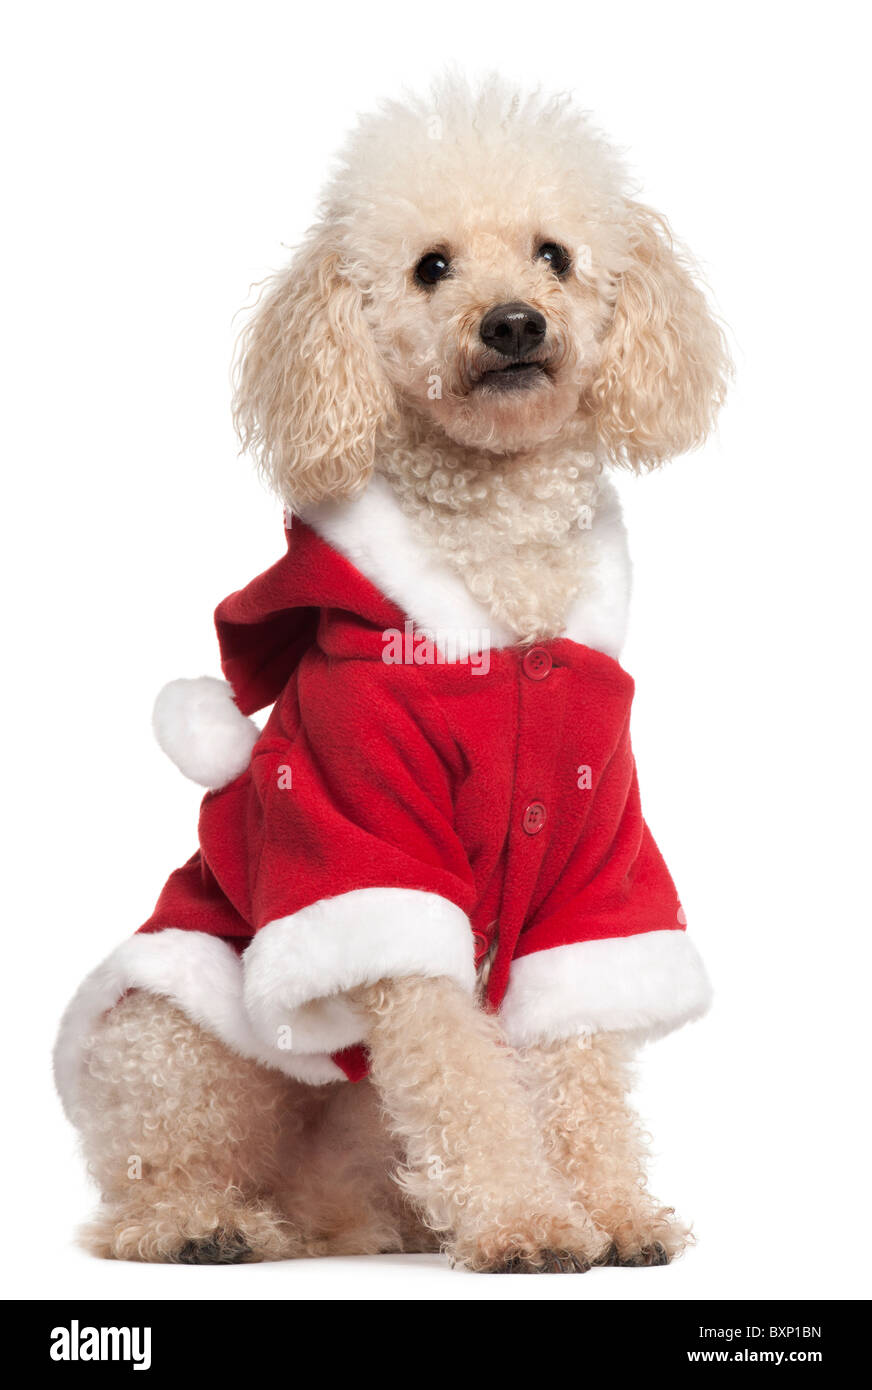 Poodle wearing Santa outfit, 8 years old, in front of white background Stock Photo